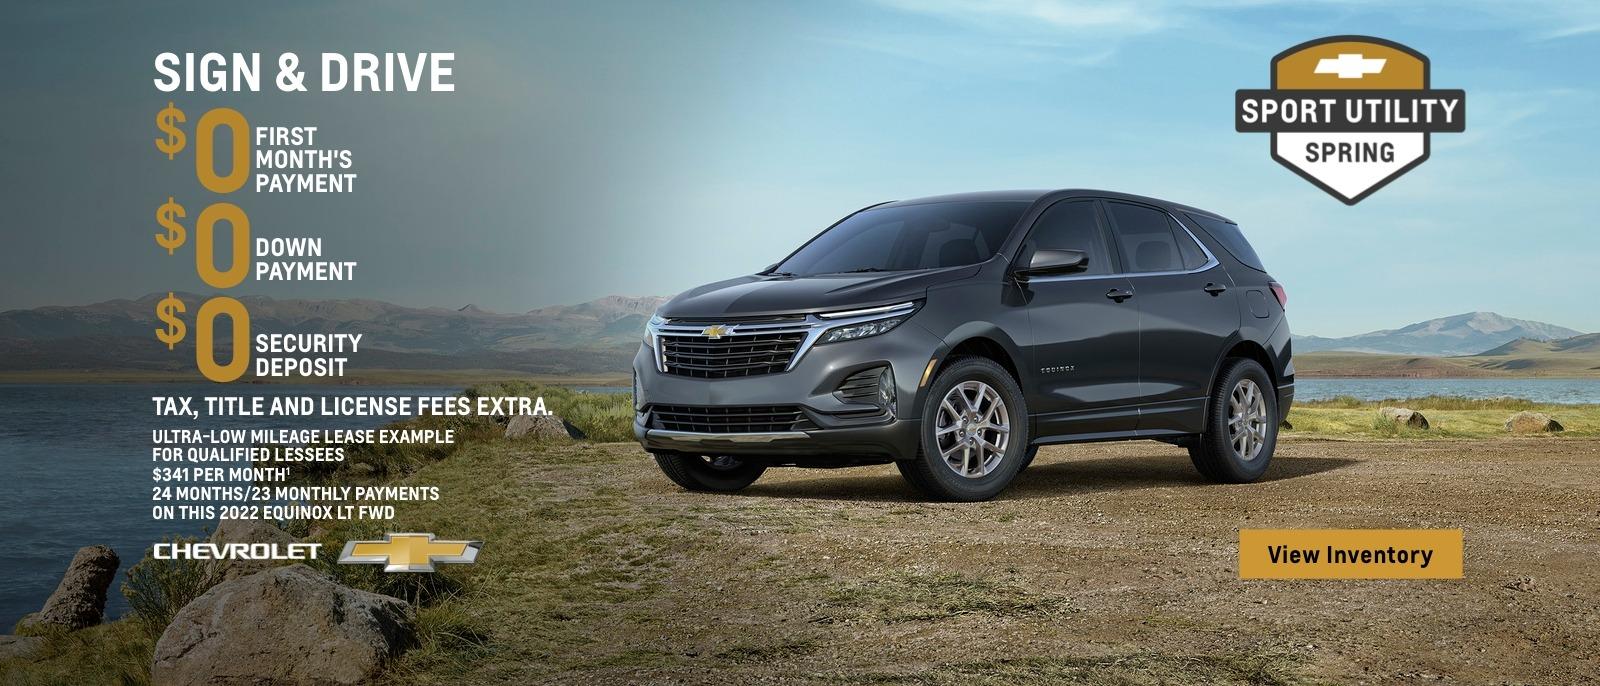 2022 Chevy Equinox LT FWD. Sign & Drive. $0 first month's payment. $0 down payment. $0 security deposit. Tax, title and license fees extra. Ultra-low mileage lease example for  qualified lessees. $341 per month. 24 months/23 monthly payments on this Equinox LT FWD.